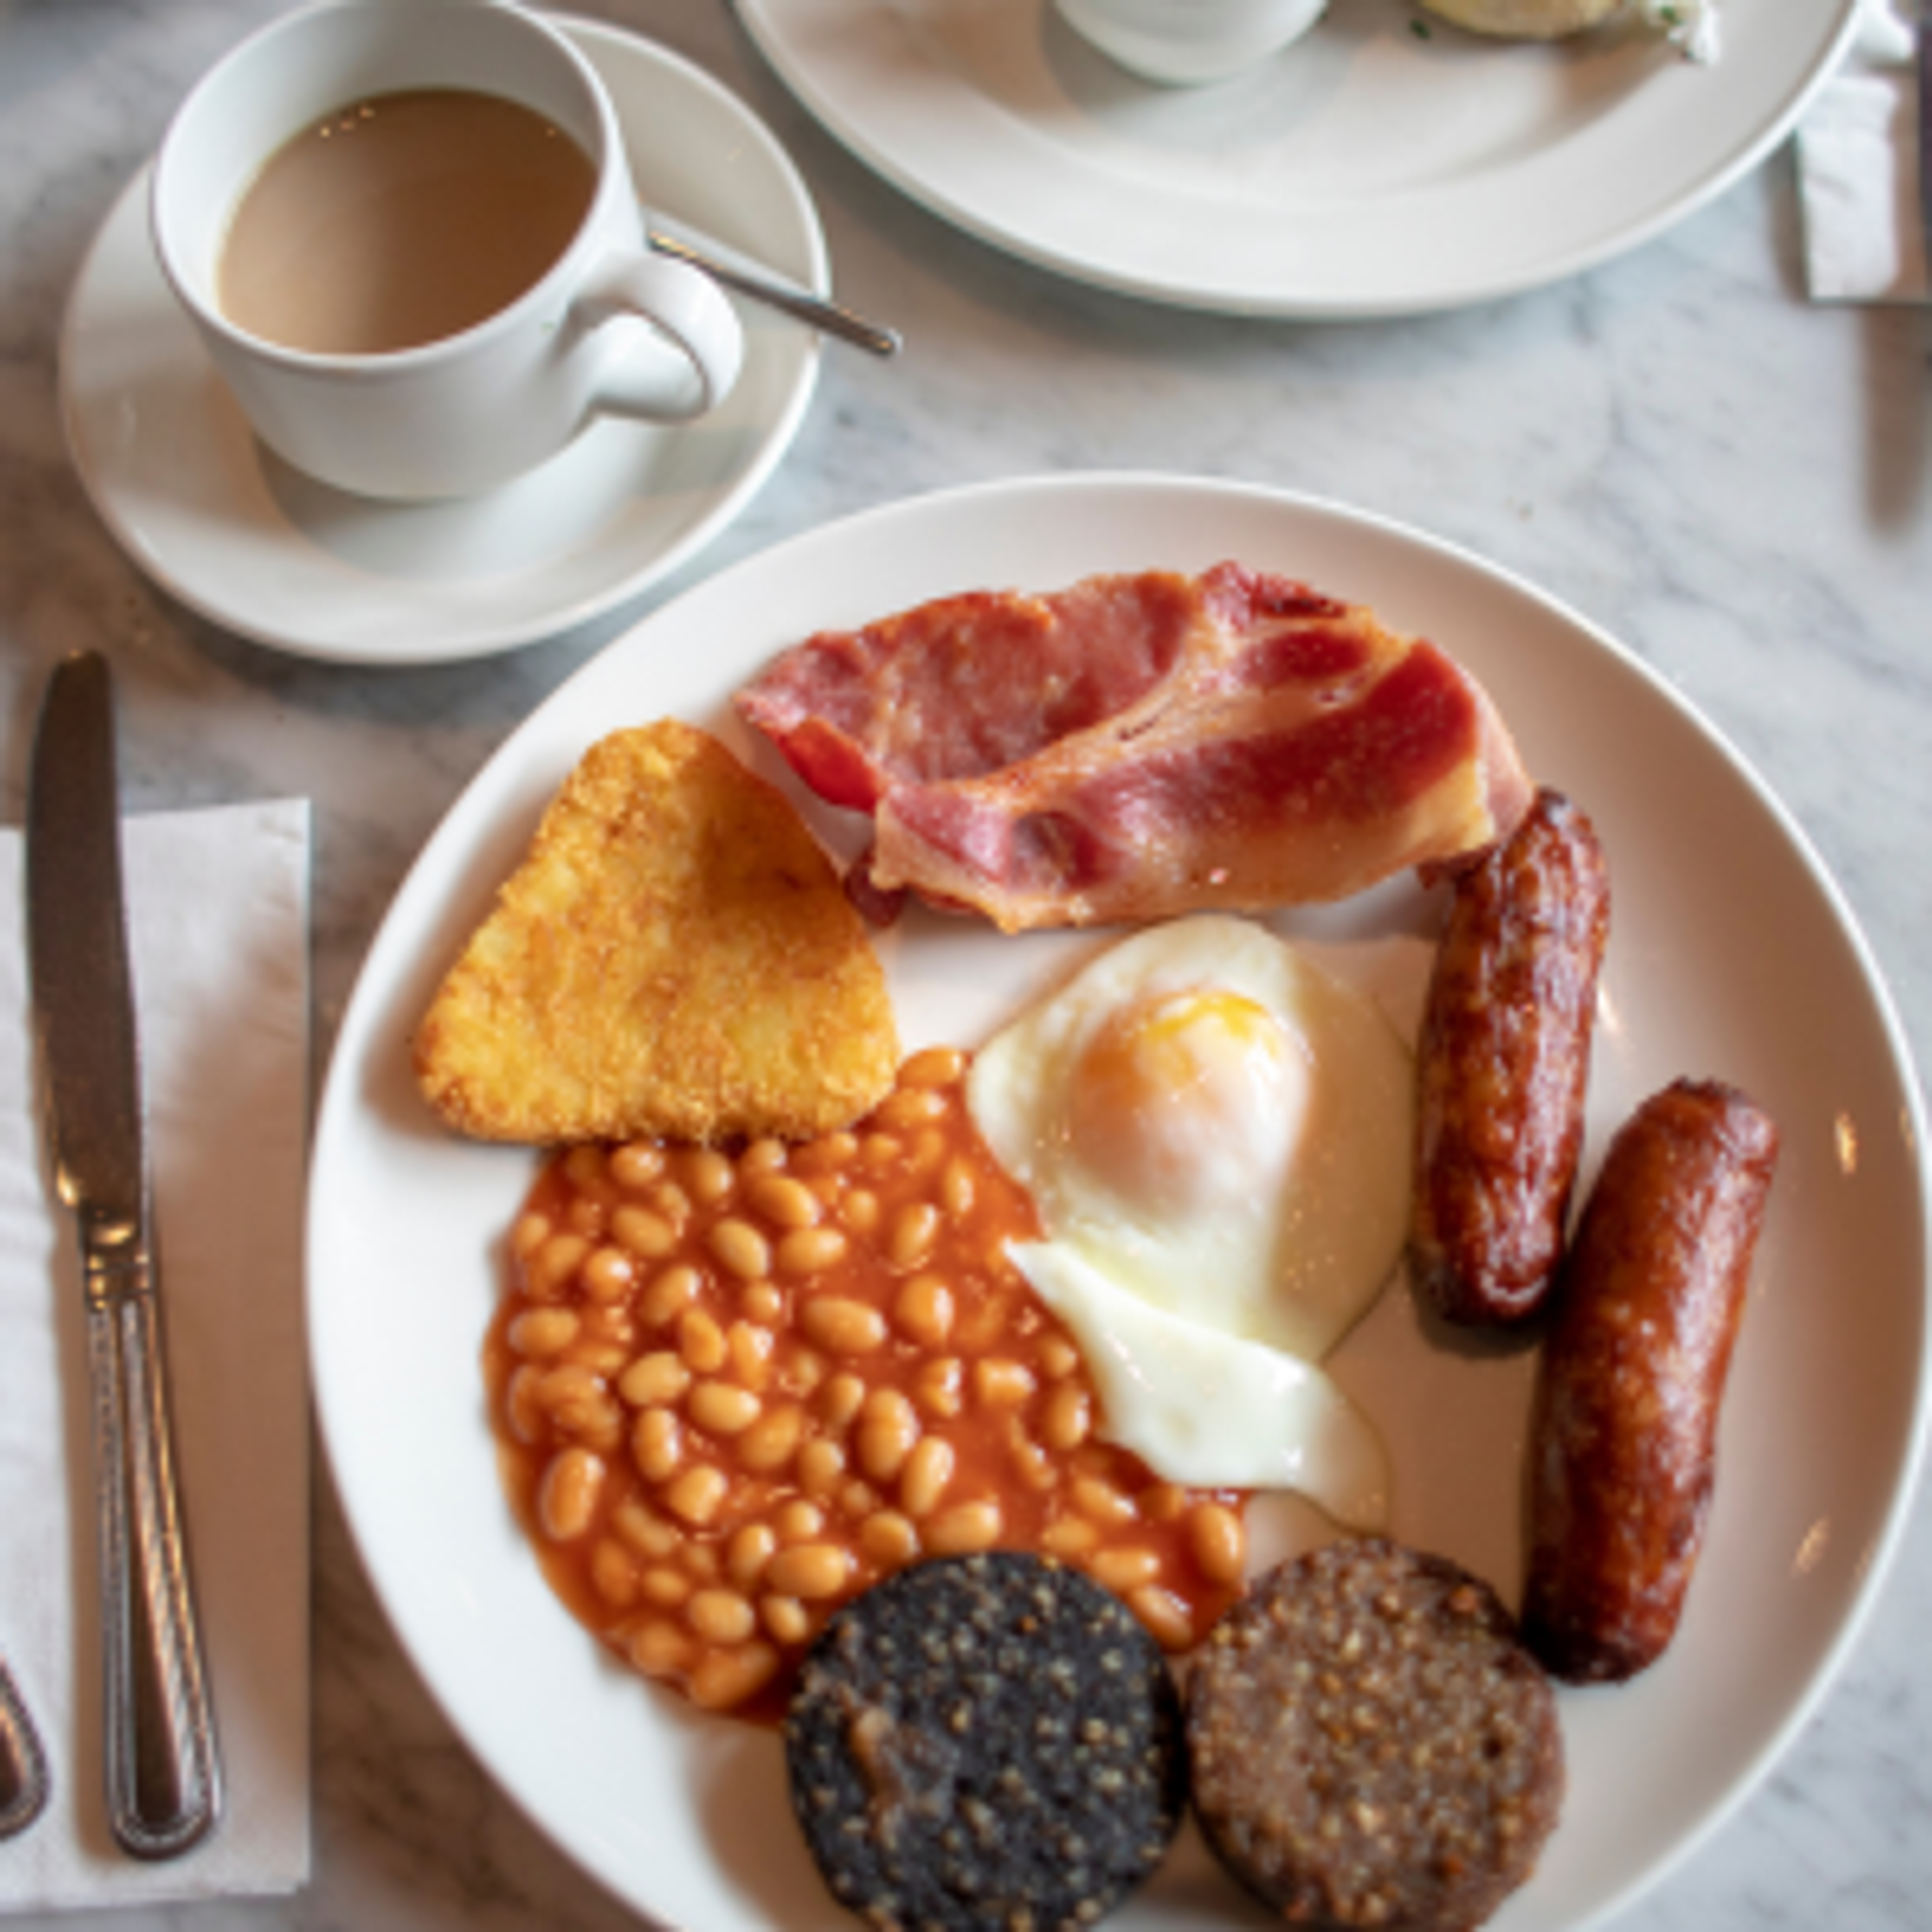 A traditional Irish Breakfast with delicious bacon, sausage, hash browns, and black and white pudding